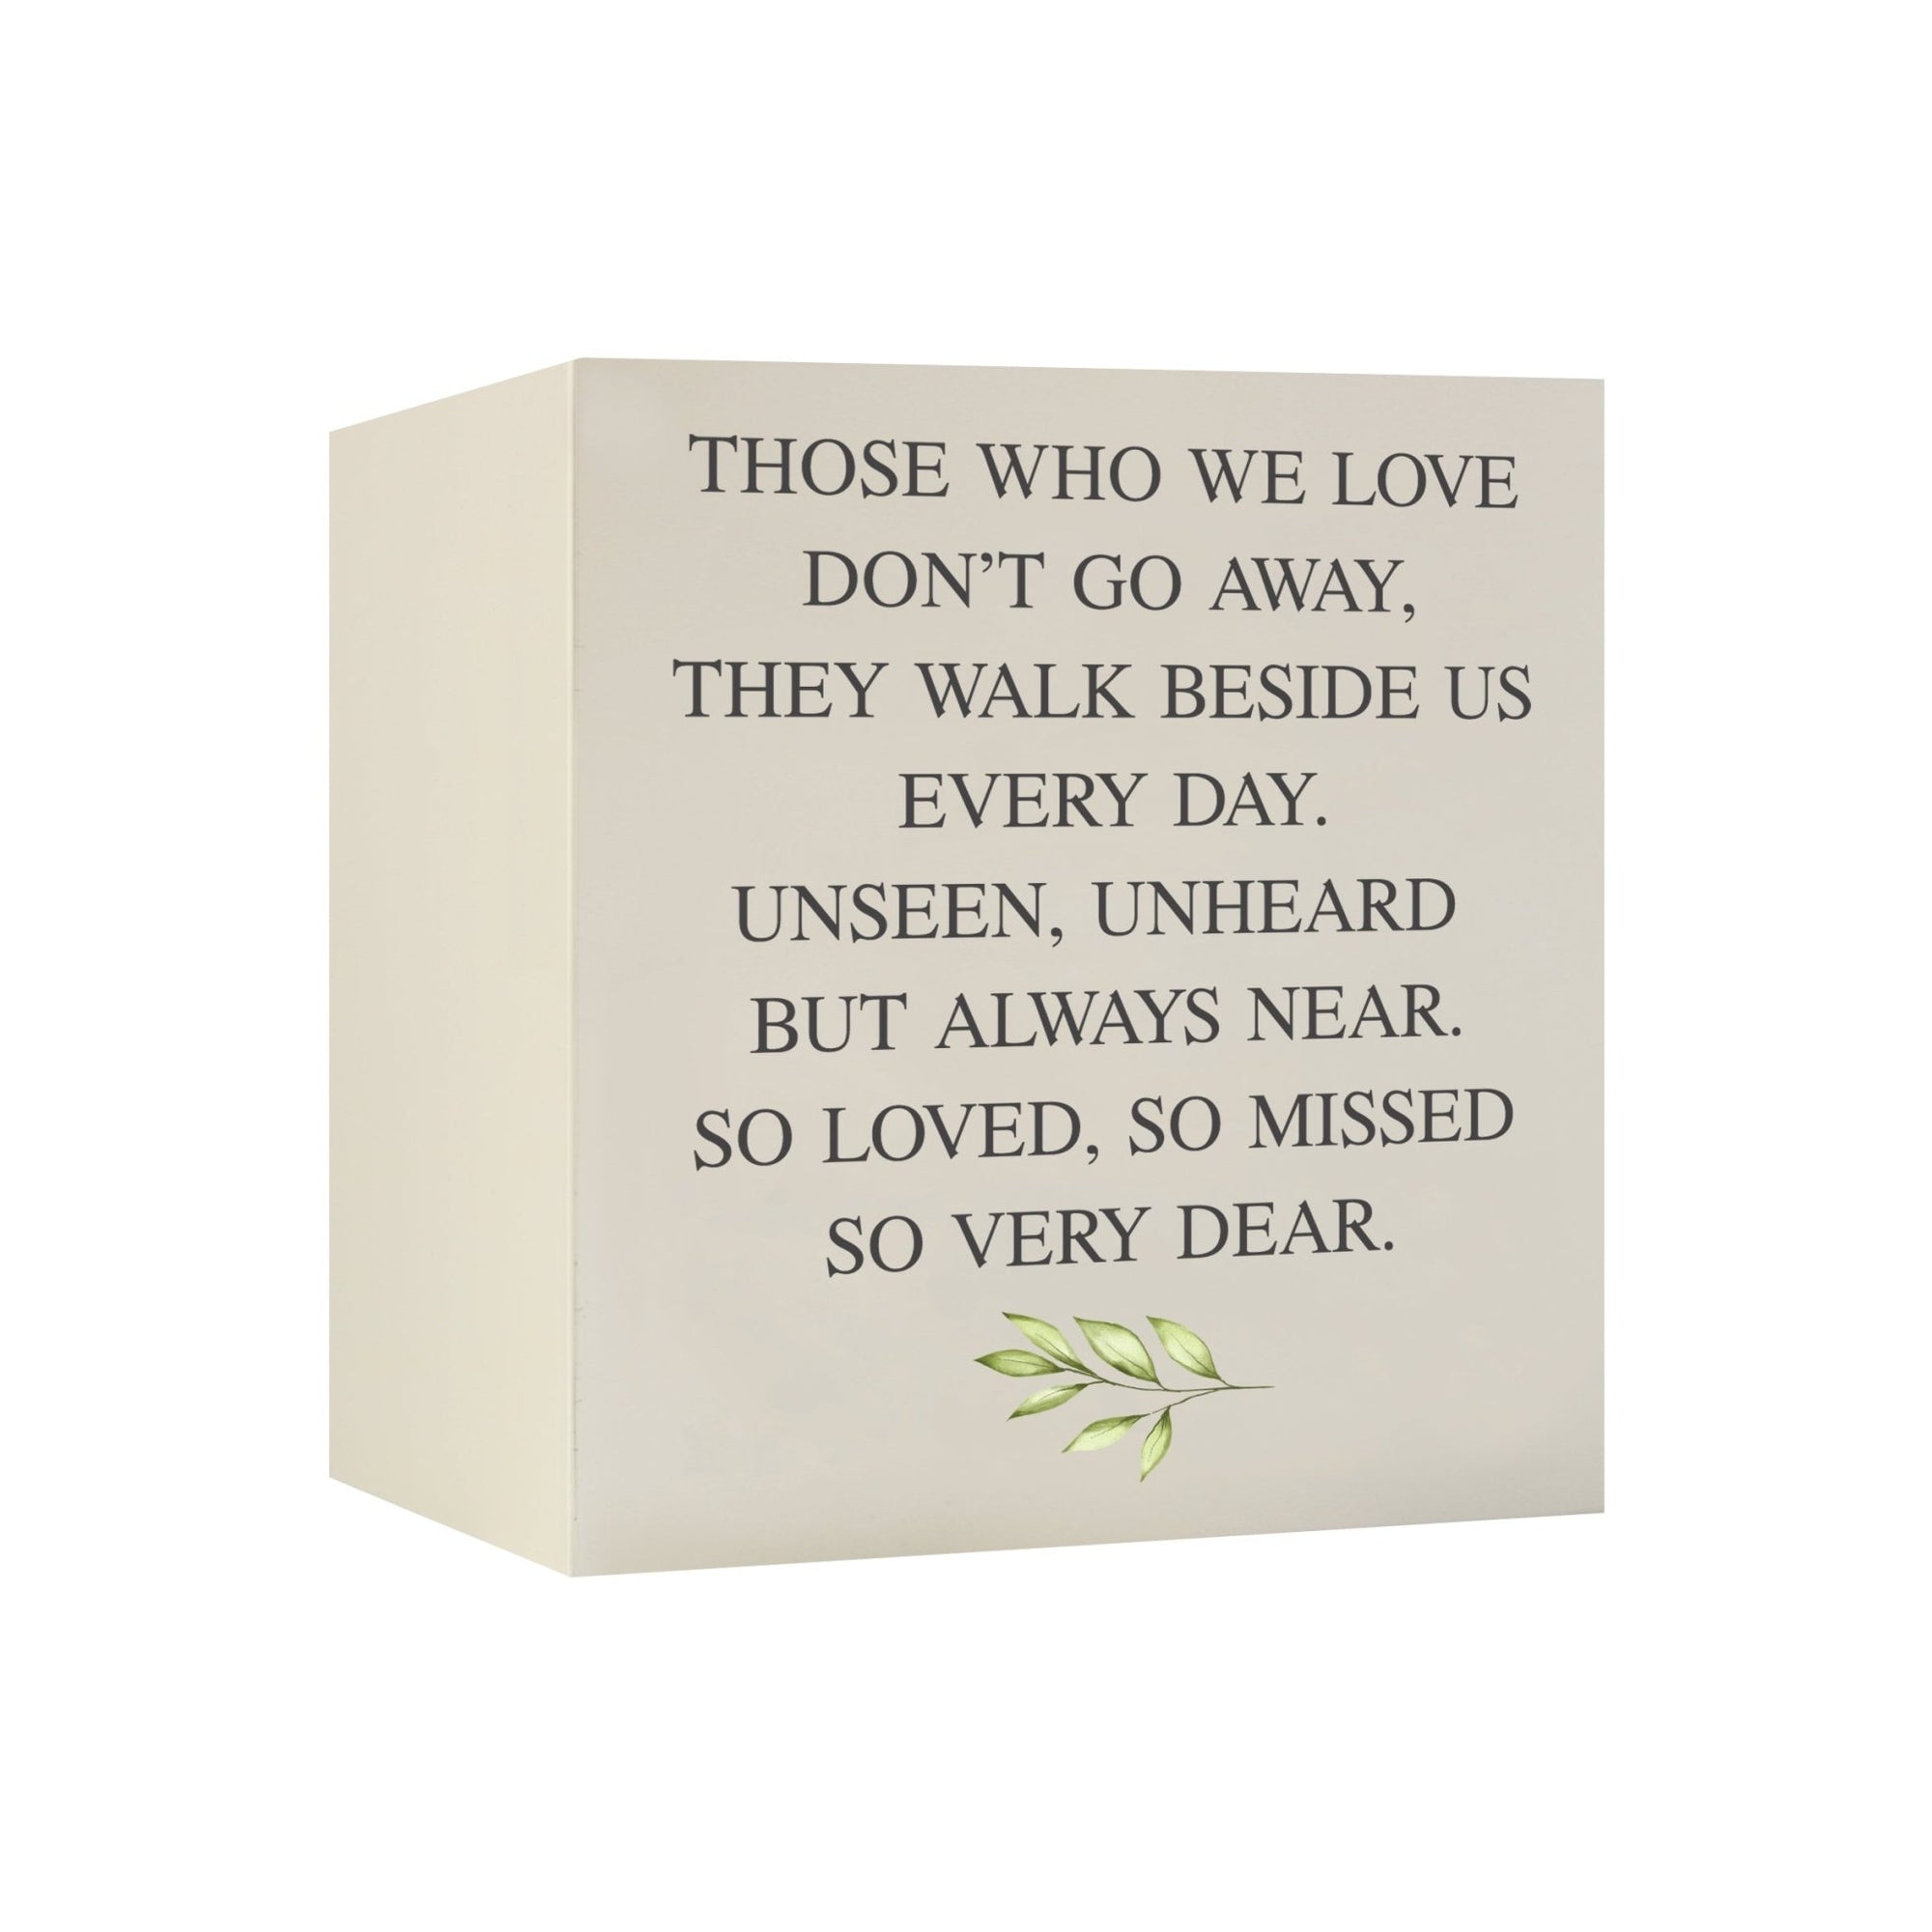 Memorial Bereavement Keepsake Cremation Shadow Box and Urn 6x6in Holds 53 Cu Inches Of Human Ashes Those Who We Love - LifeSong Milestones